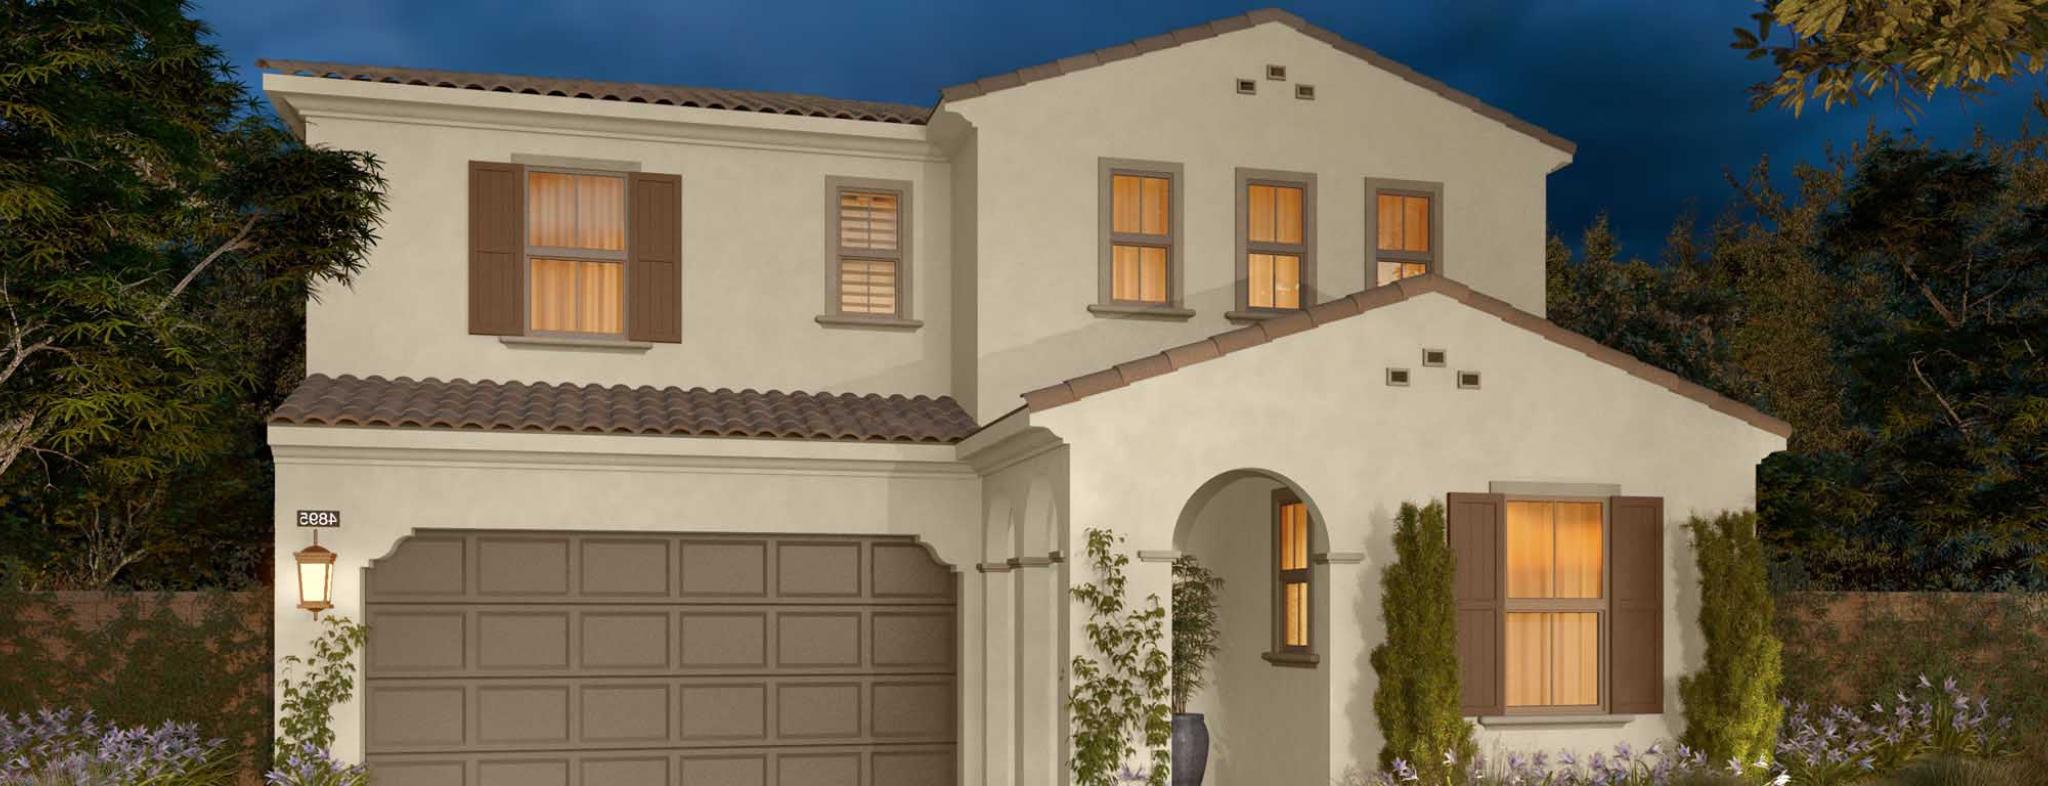 The New Home Company Set to Open First Inland Empire Neighborhood